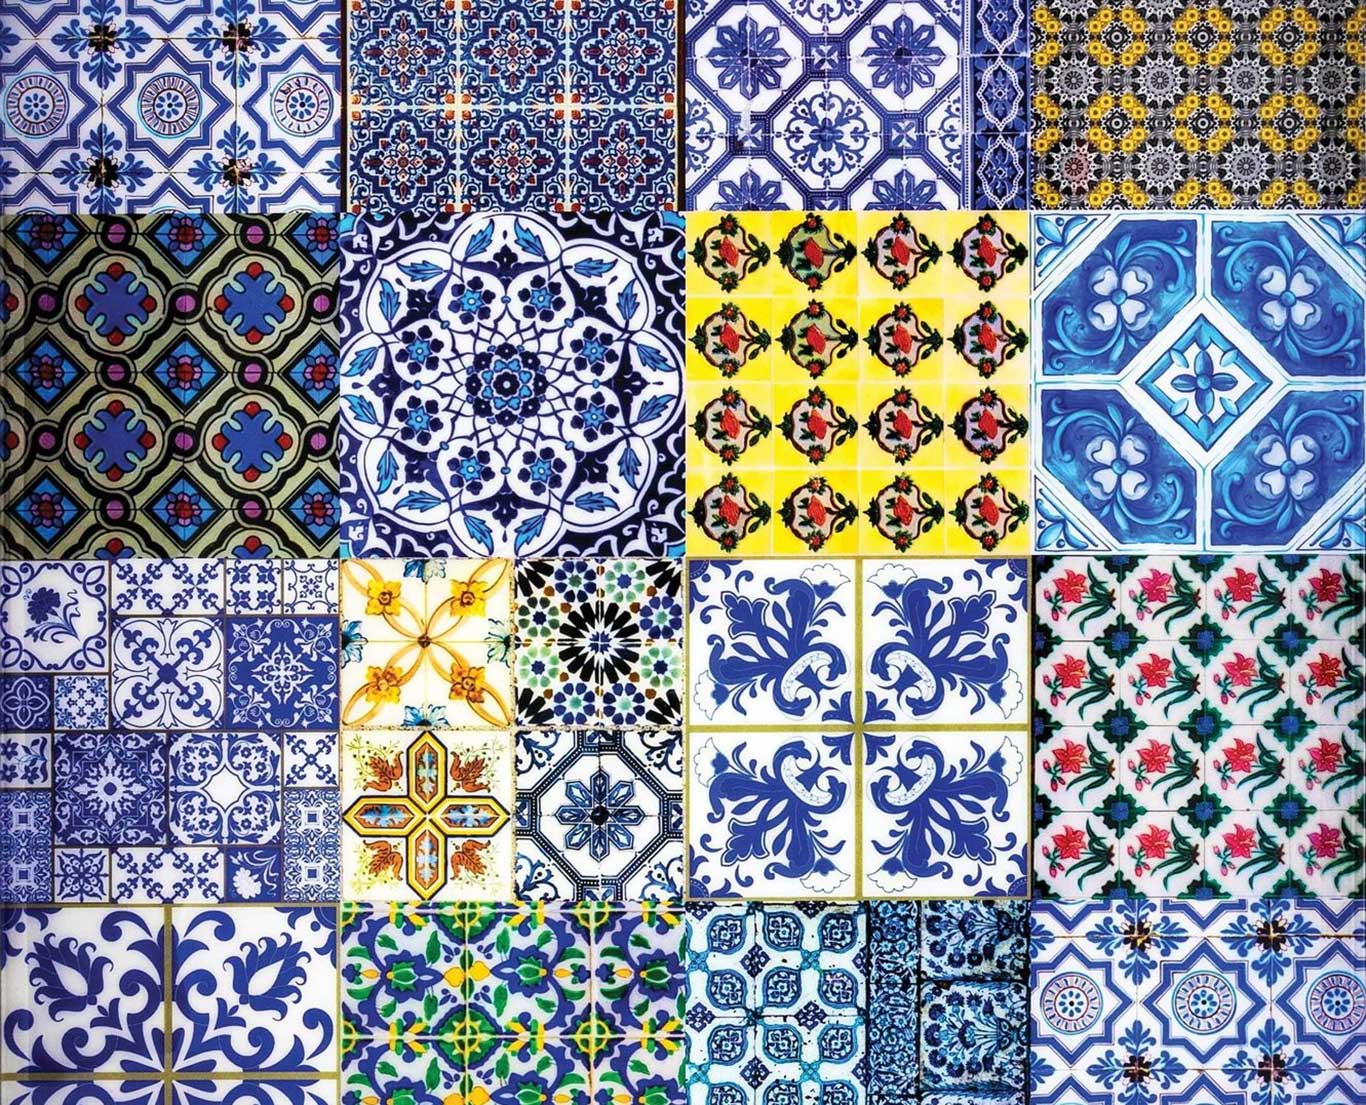 Intricate Peranakan vector tiles with blue and yellow designs.